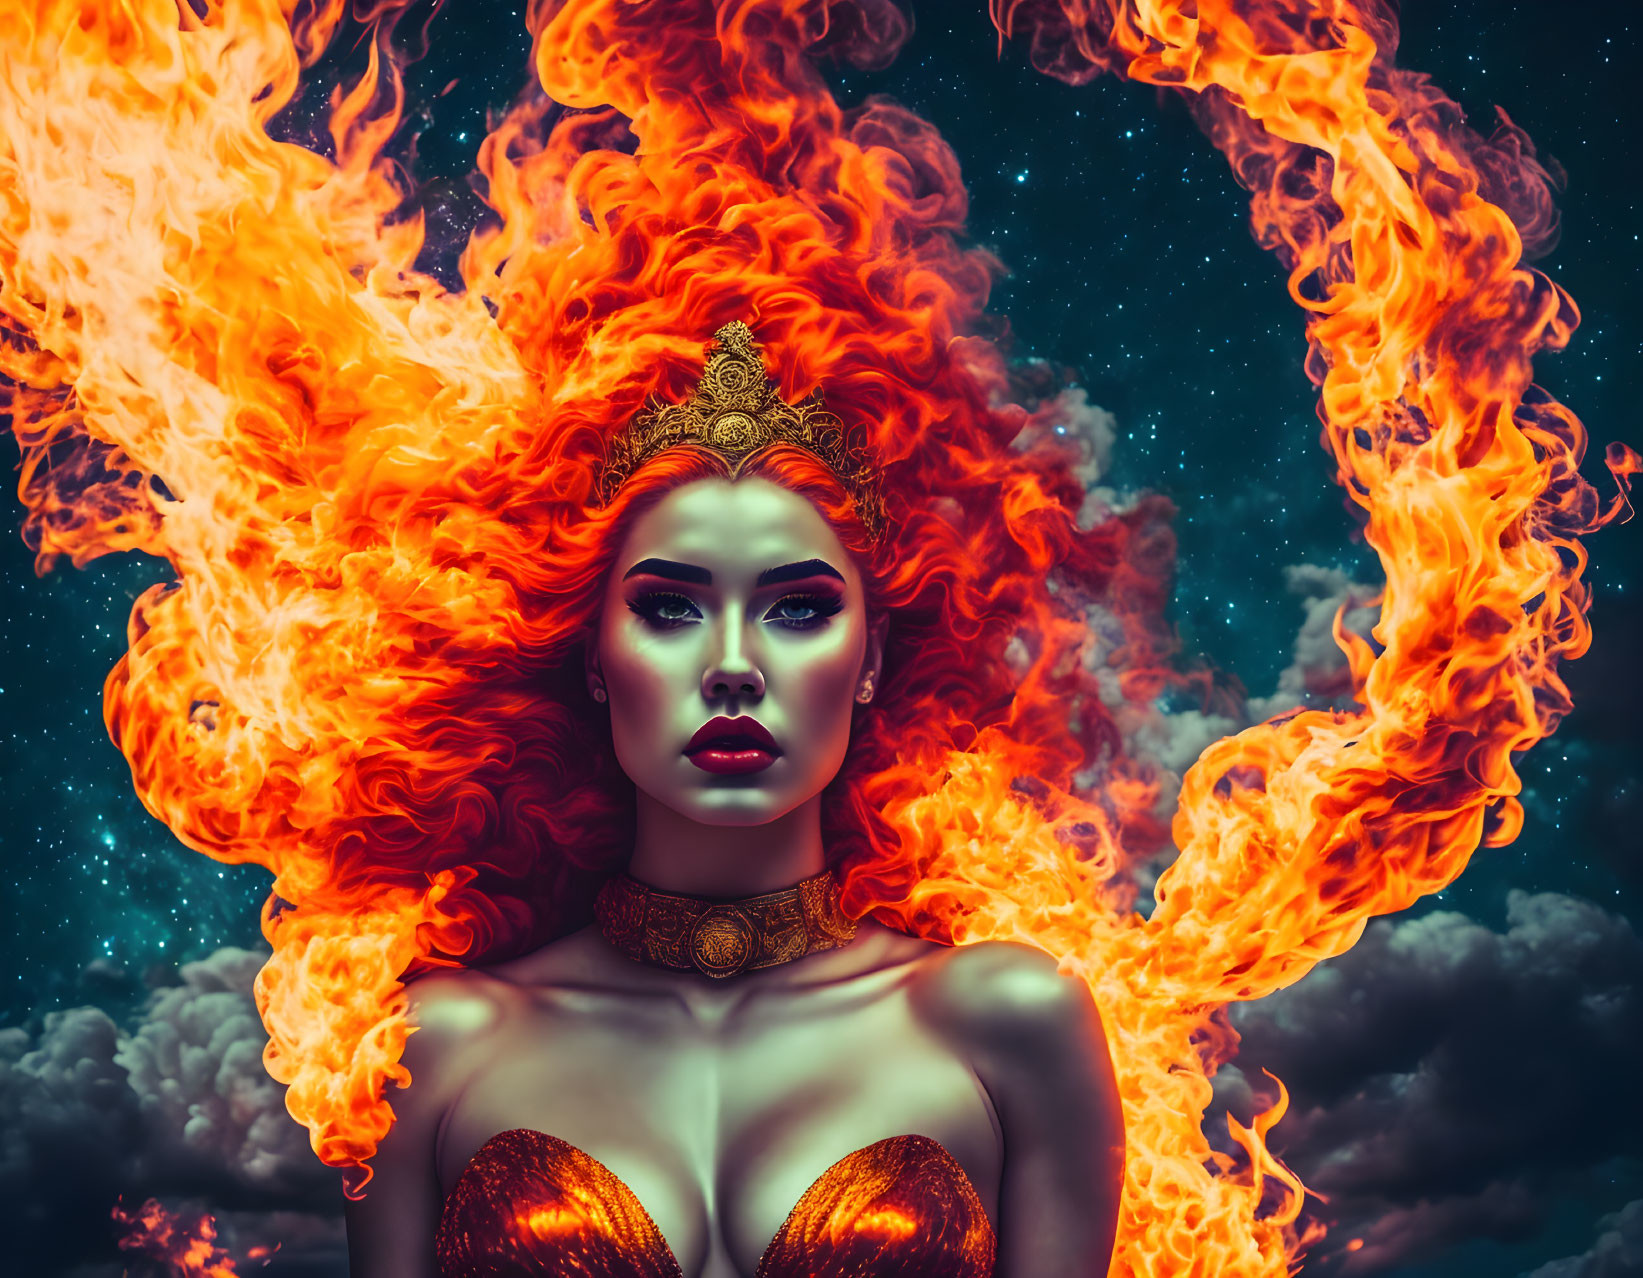  The Goddess is on Fire